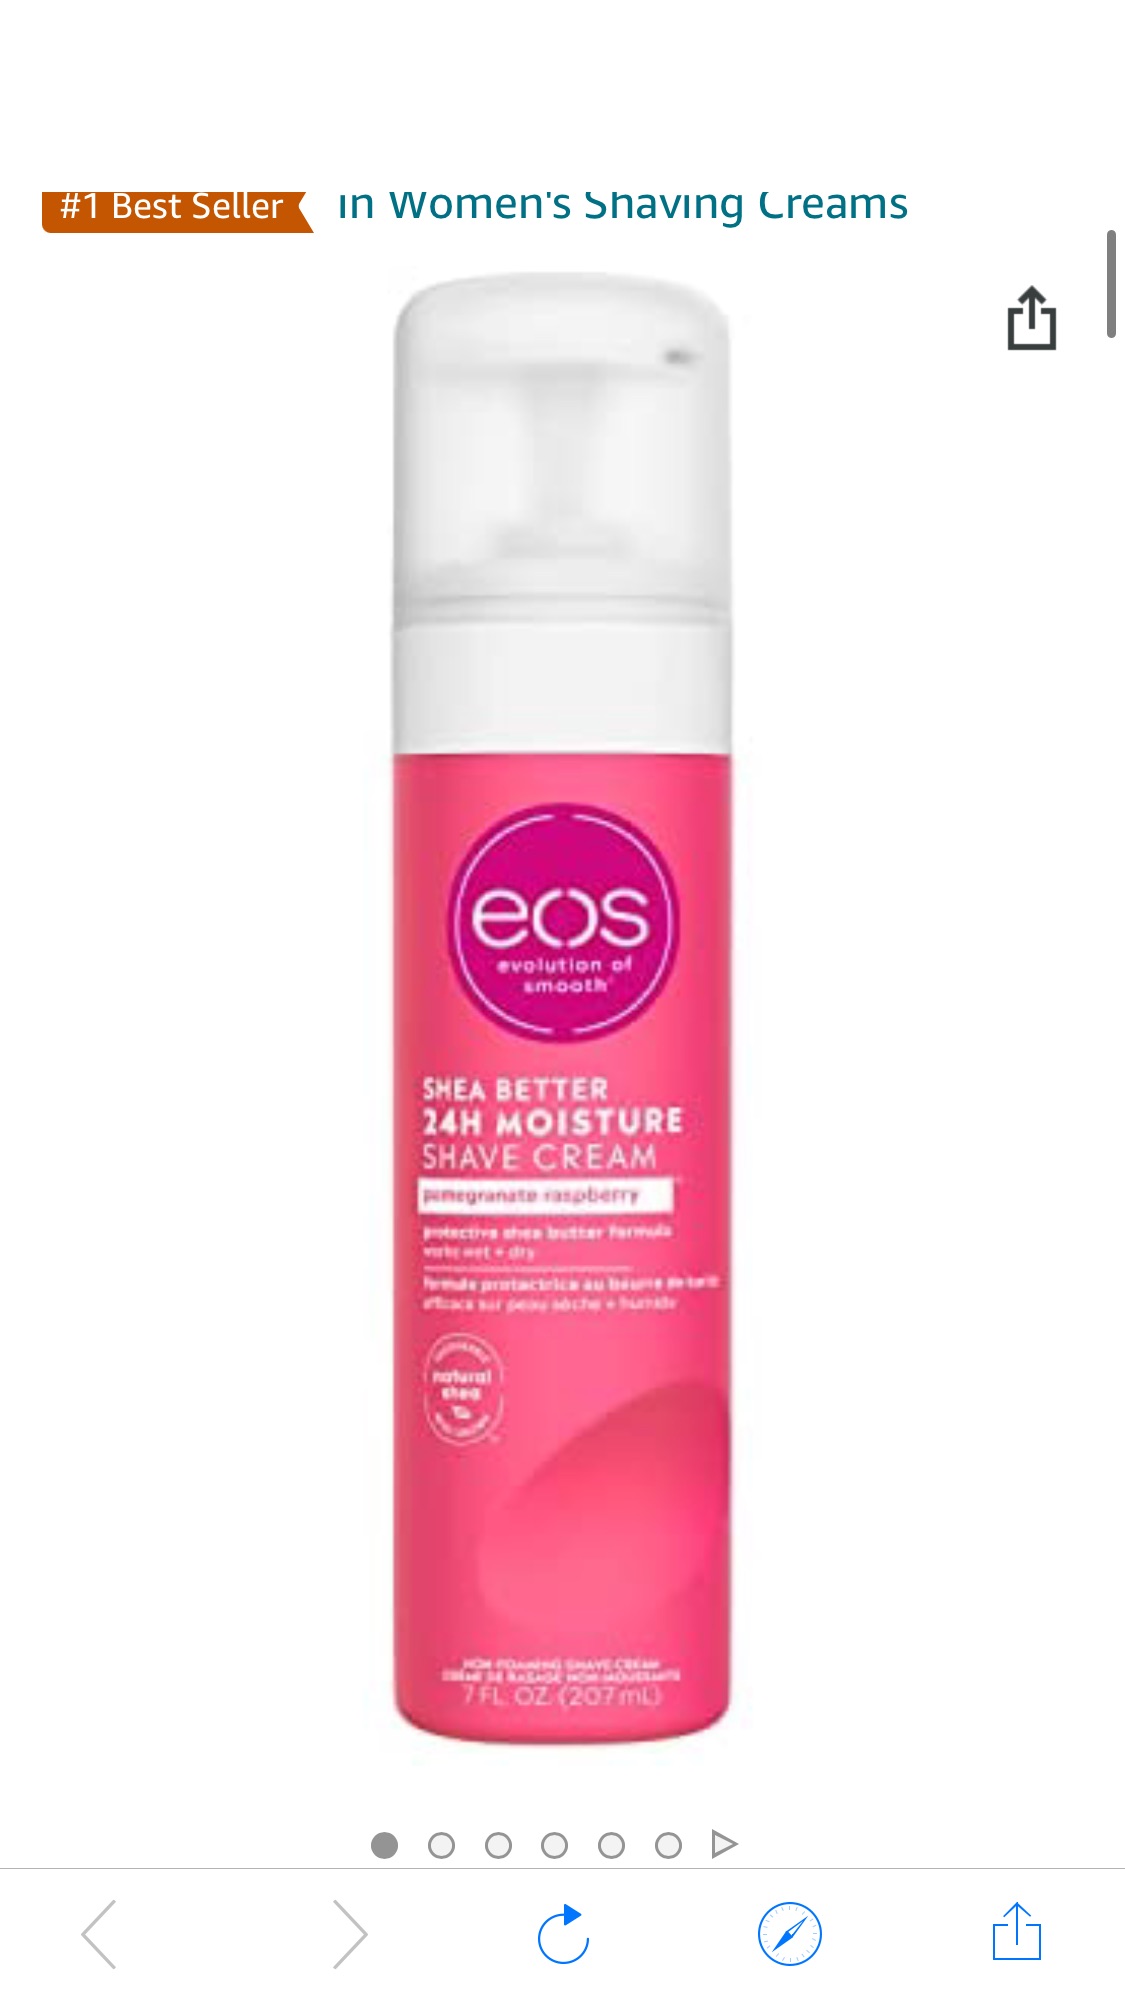 eos Shea Better Shaving Cream for Women- Pomegranate Raspberry | Shave Cream, Skin Care and Lotion with Shea Butter and Aloe | 24 Hour Hydration | 7 fl oz, (600)剃毛膏